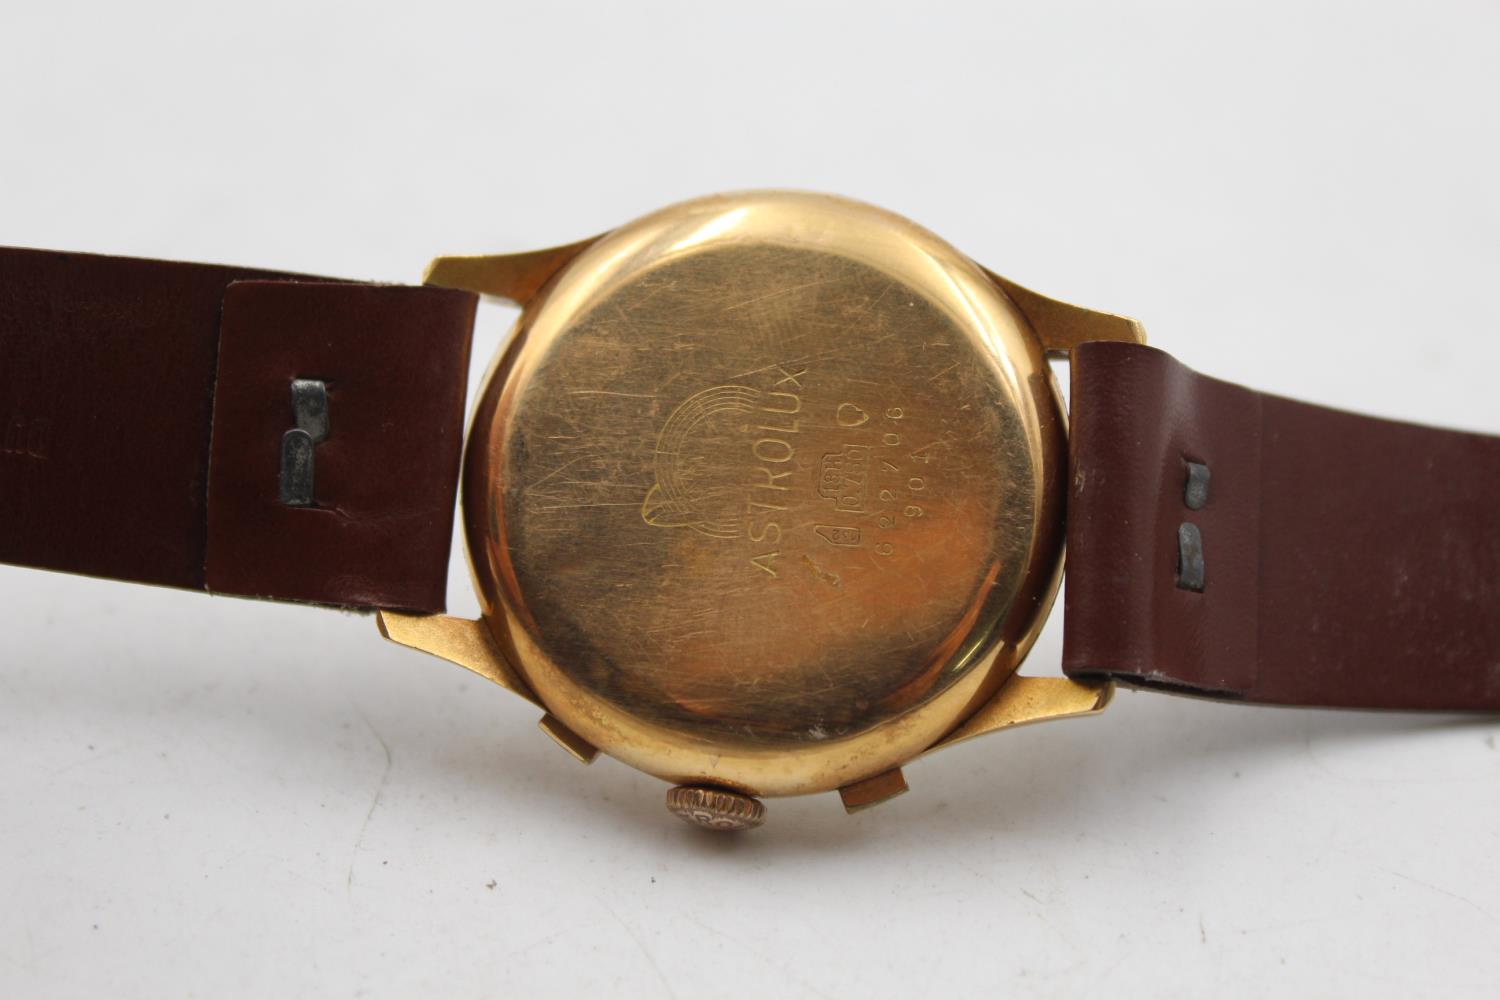 Vintage Gents ASTROLUX 18ct Gold Cased Chronograph WRISTWATCH Hand-Wind WORKING RARE Vintage Gents - Image 5 of 7